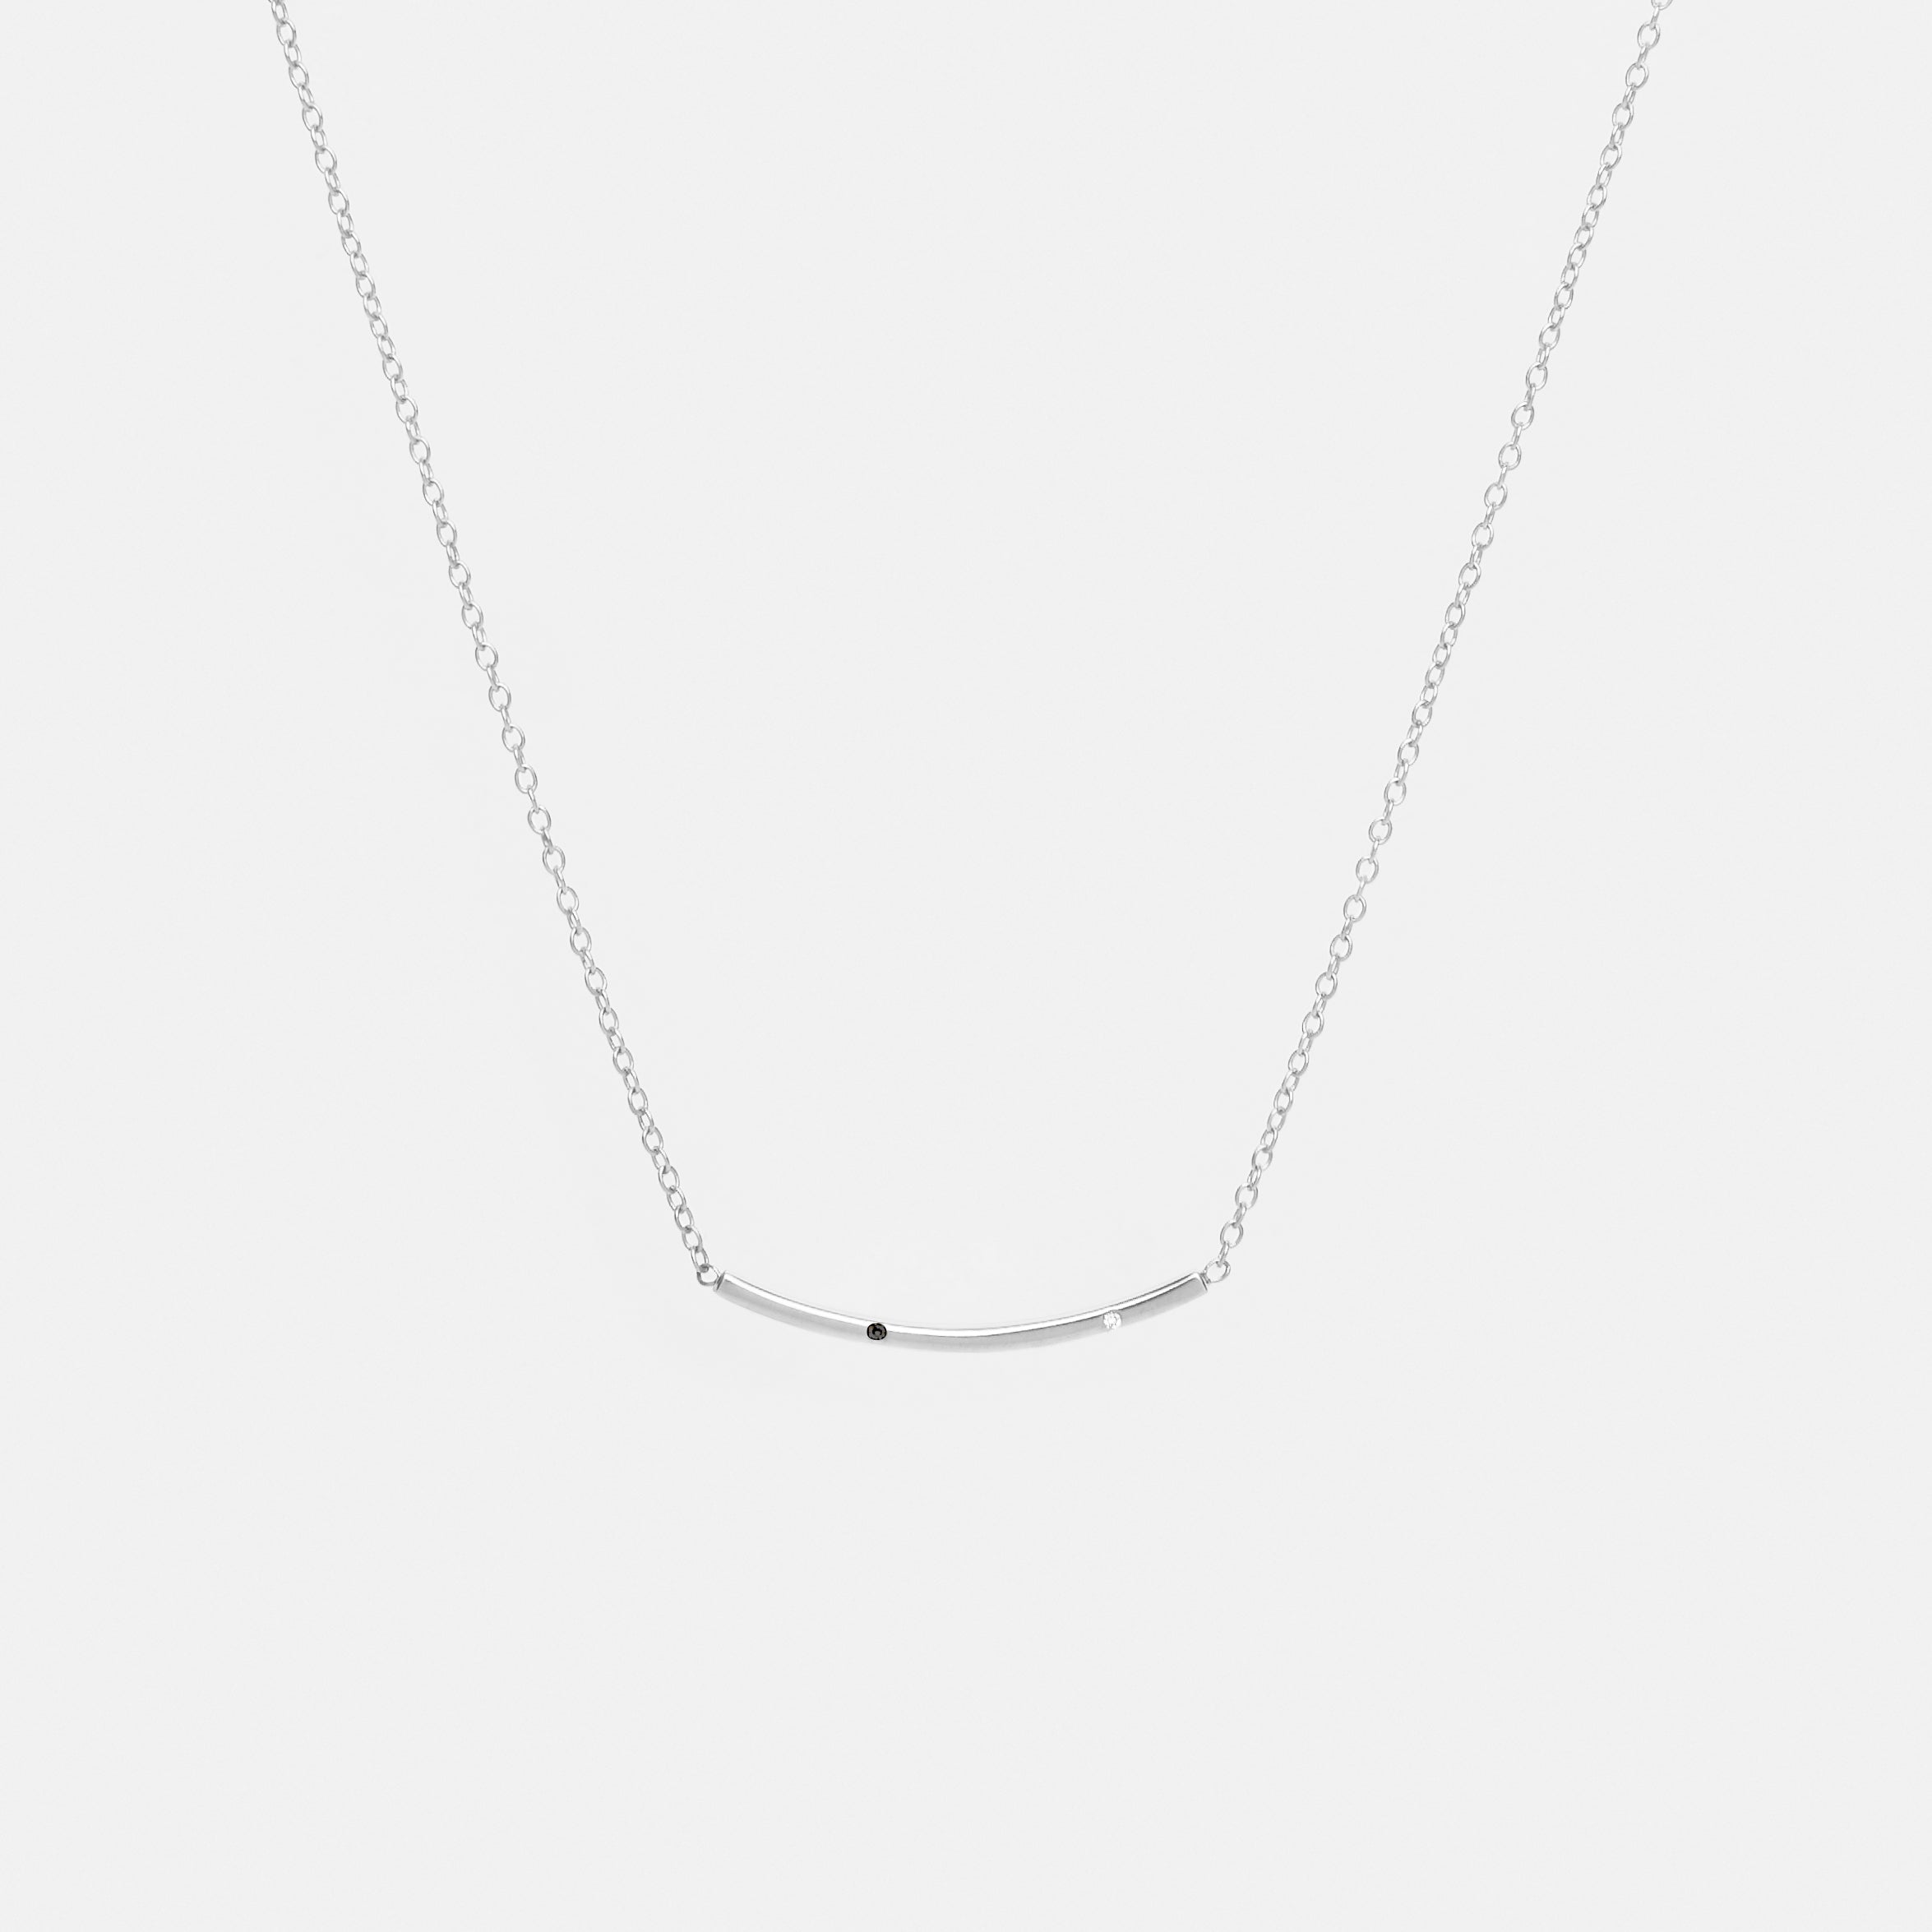 Sara Minimalist Necklace in Sterling Silver set with Black and White Diamonds By SHW Fine Jewelry NYC